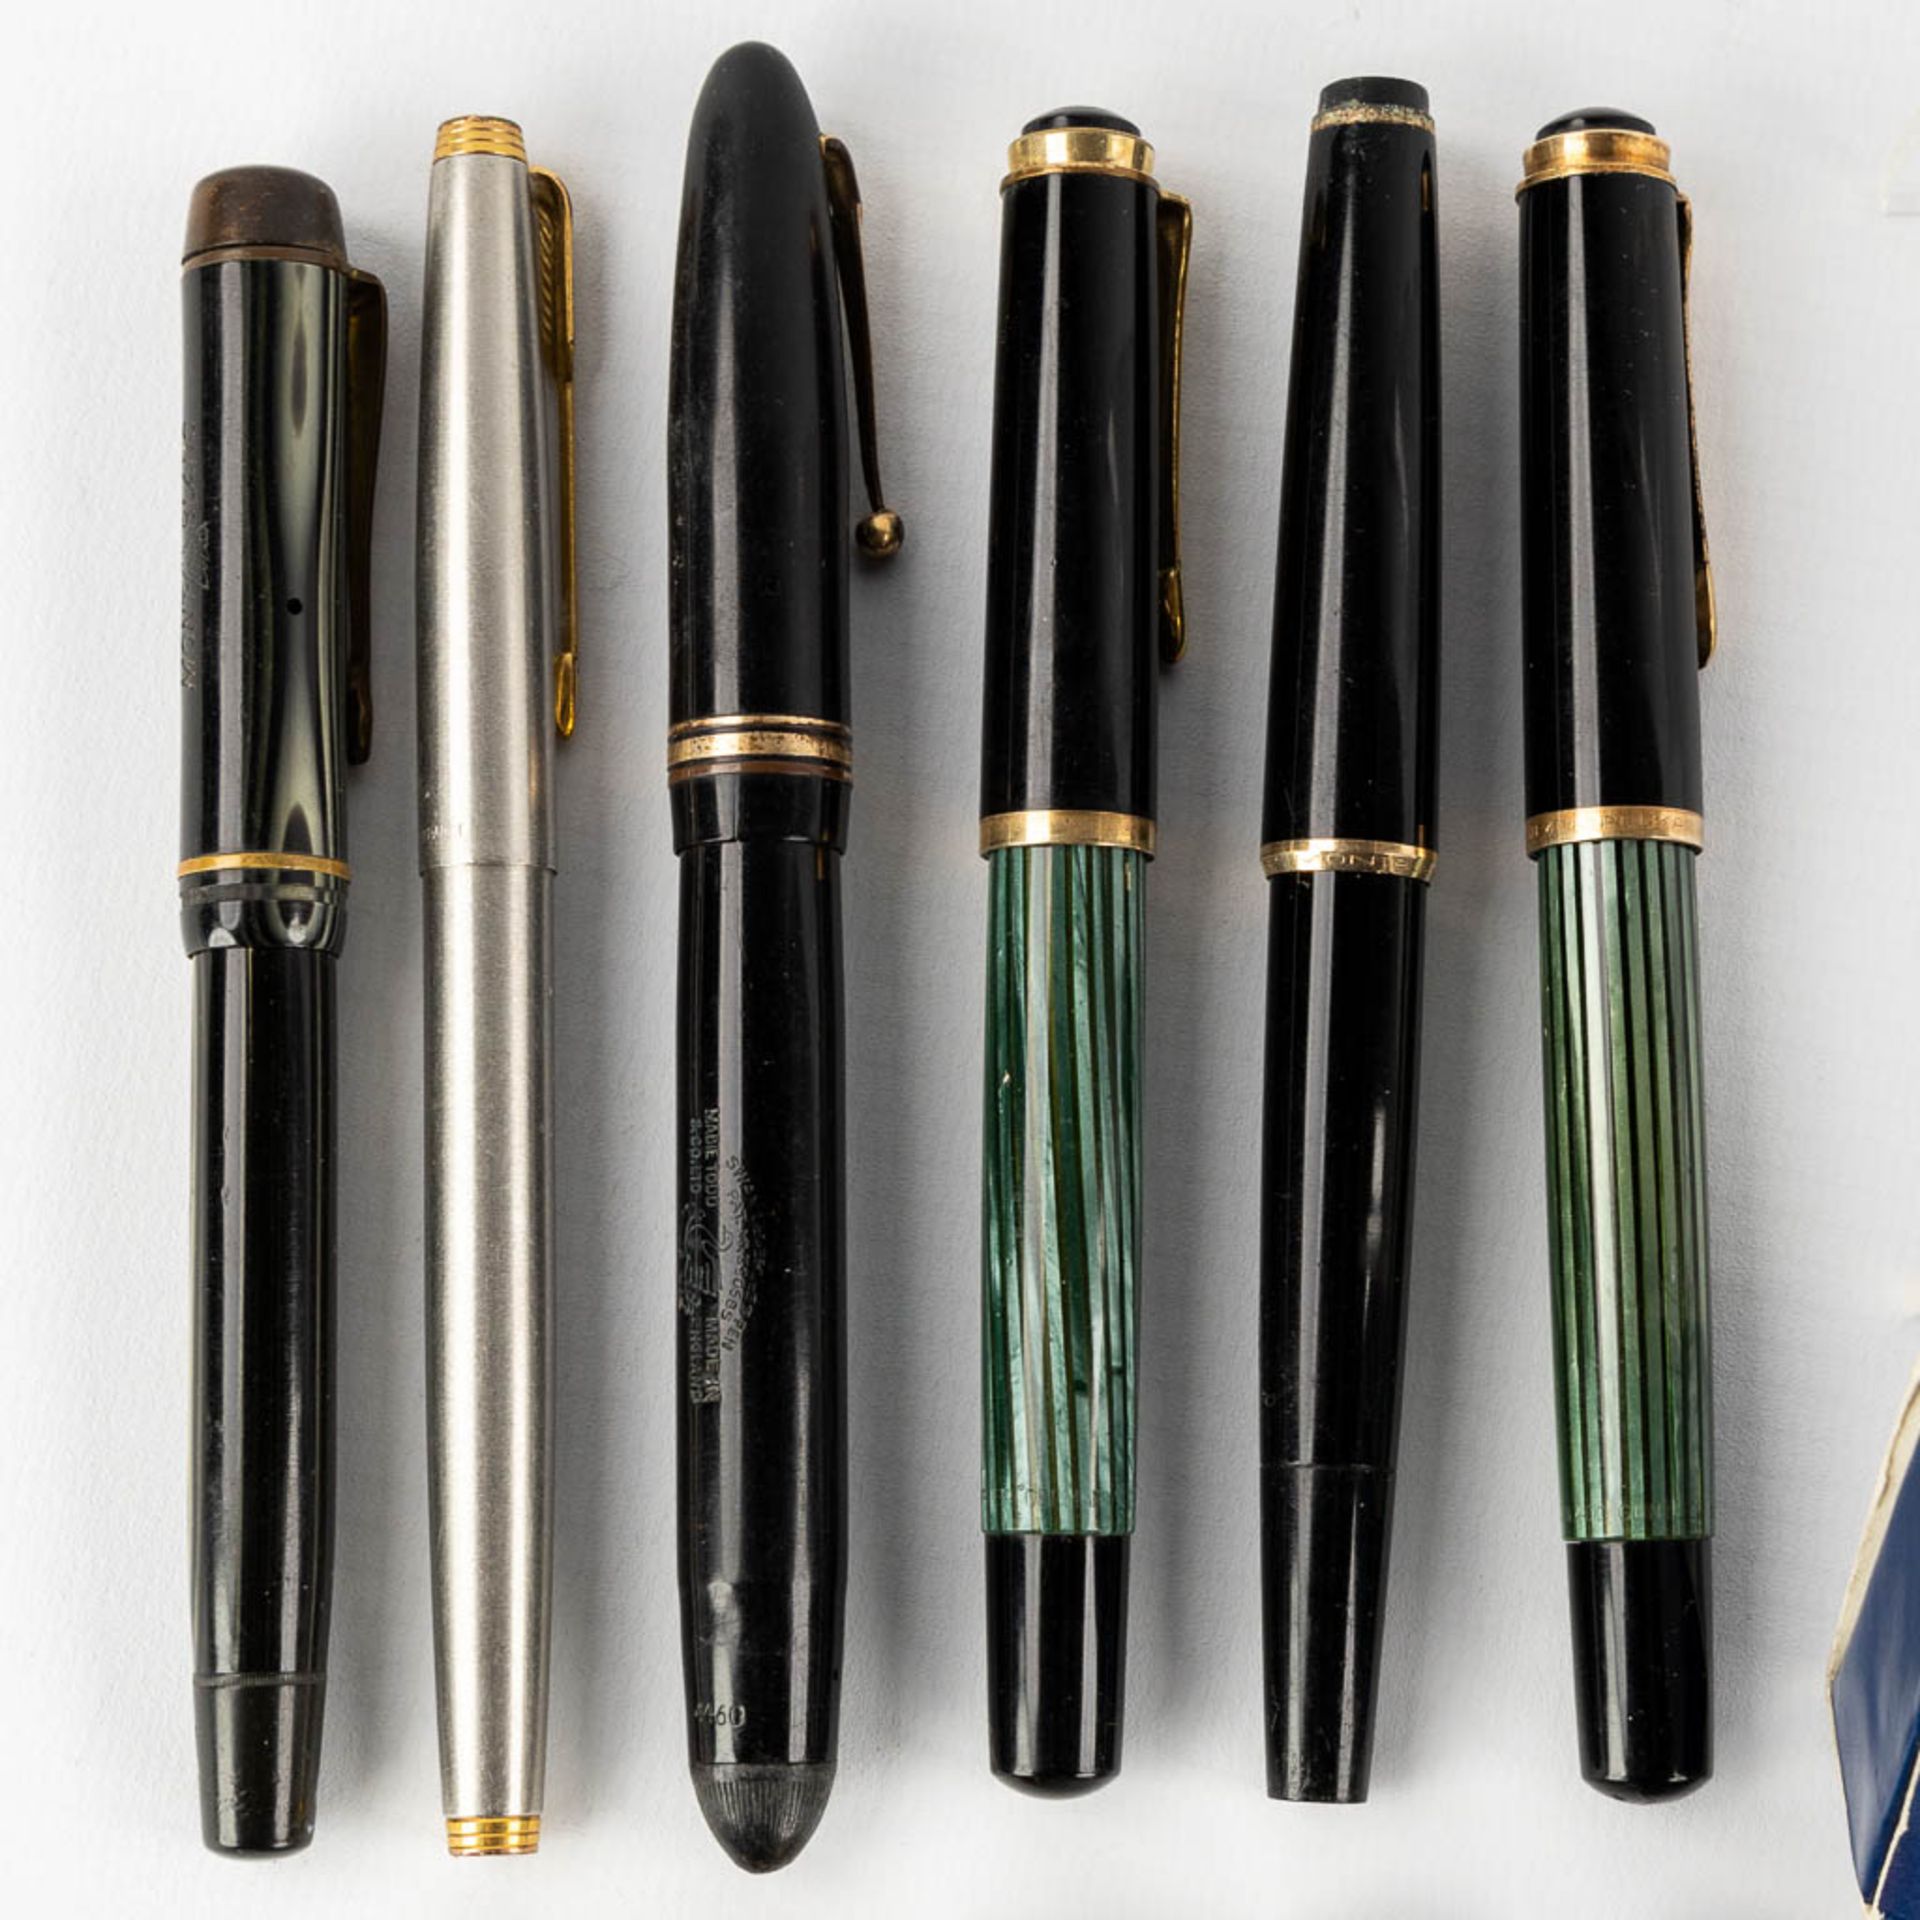 Waterman, Montblanc, Parker, Pelikan, a large collection of fountain pens, some with 14kt and 18kt g - Bild 5 aus 11